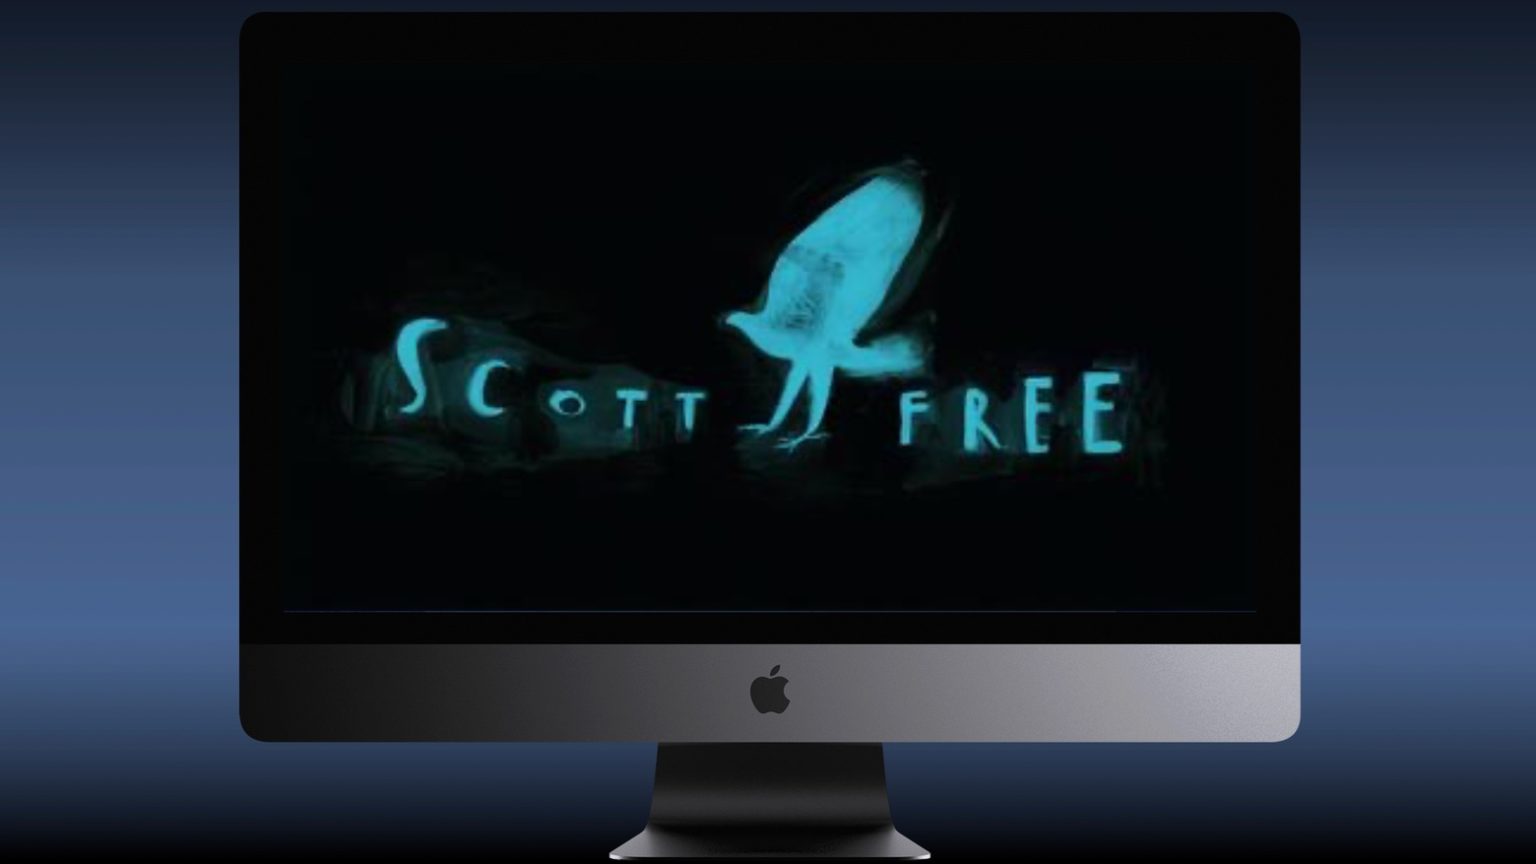 Ridley Scott and his brother are the heads of Scott Free.